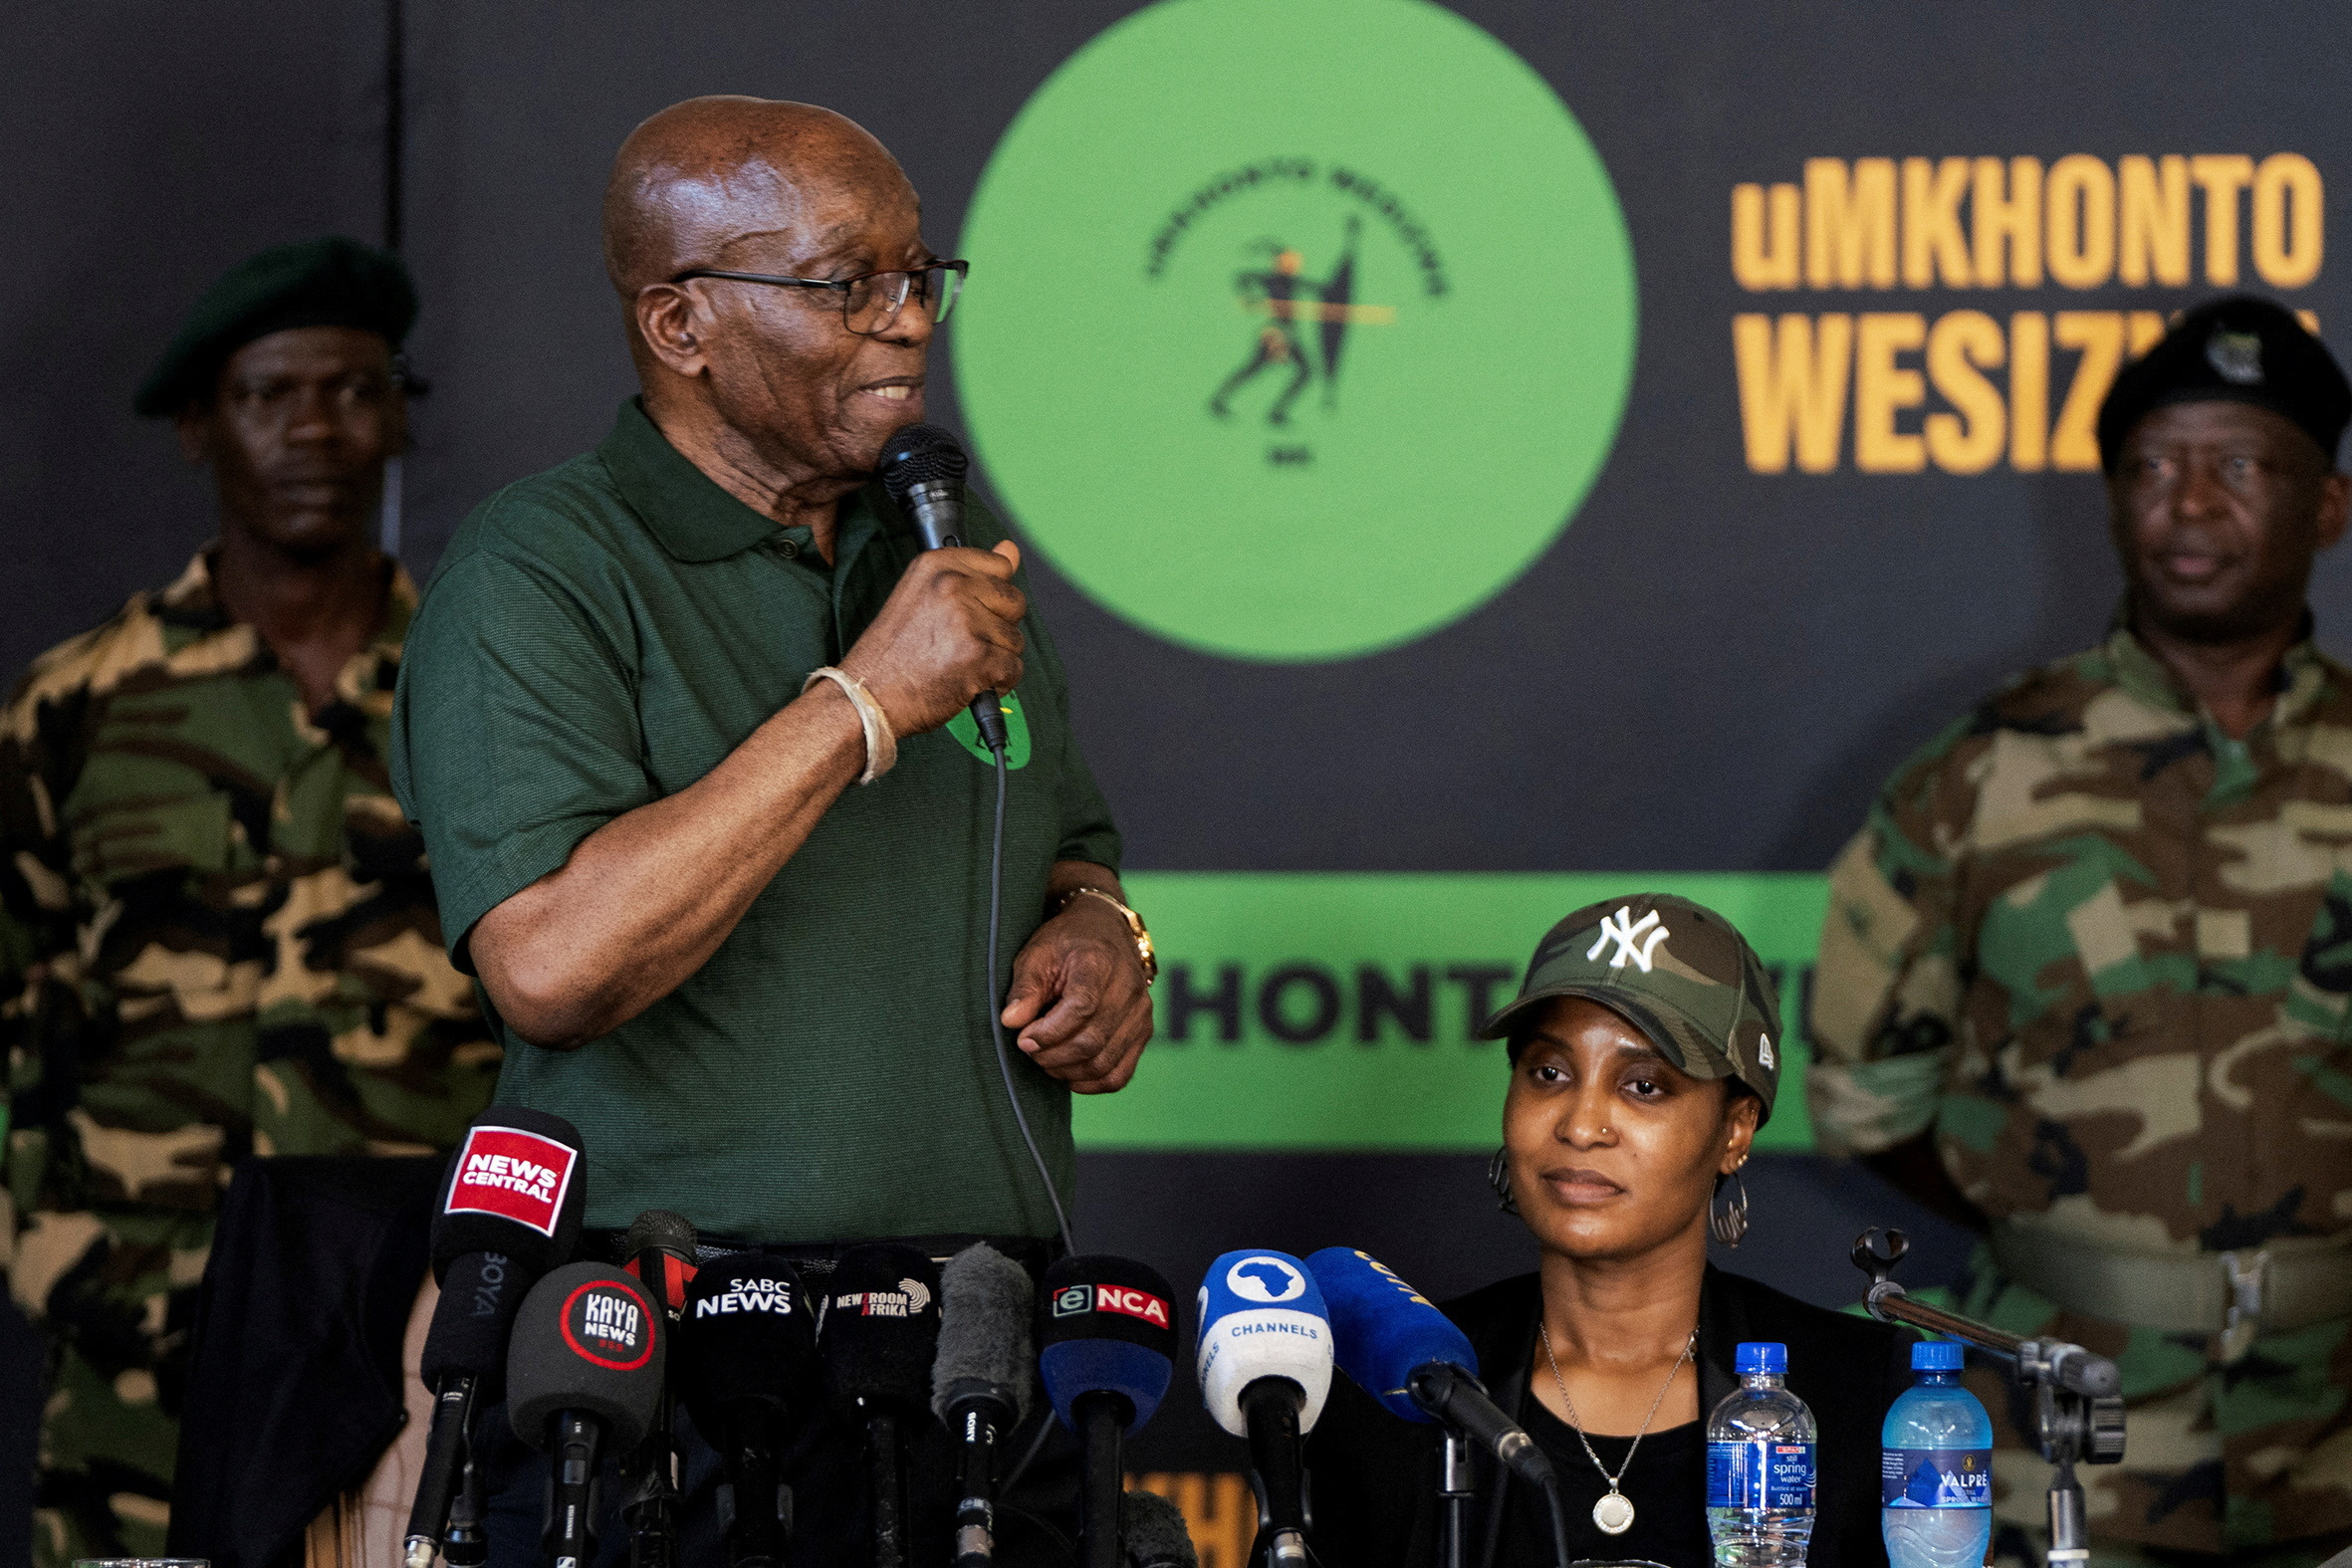 Former South African President Jacob Zuma speaks about his political future at a press conference in Soweto, in Johannesburg